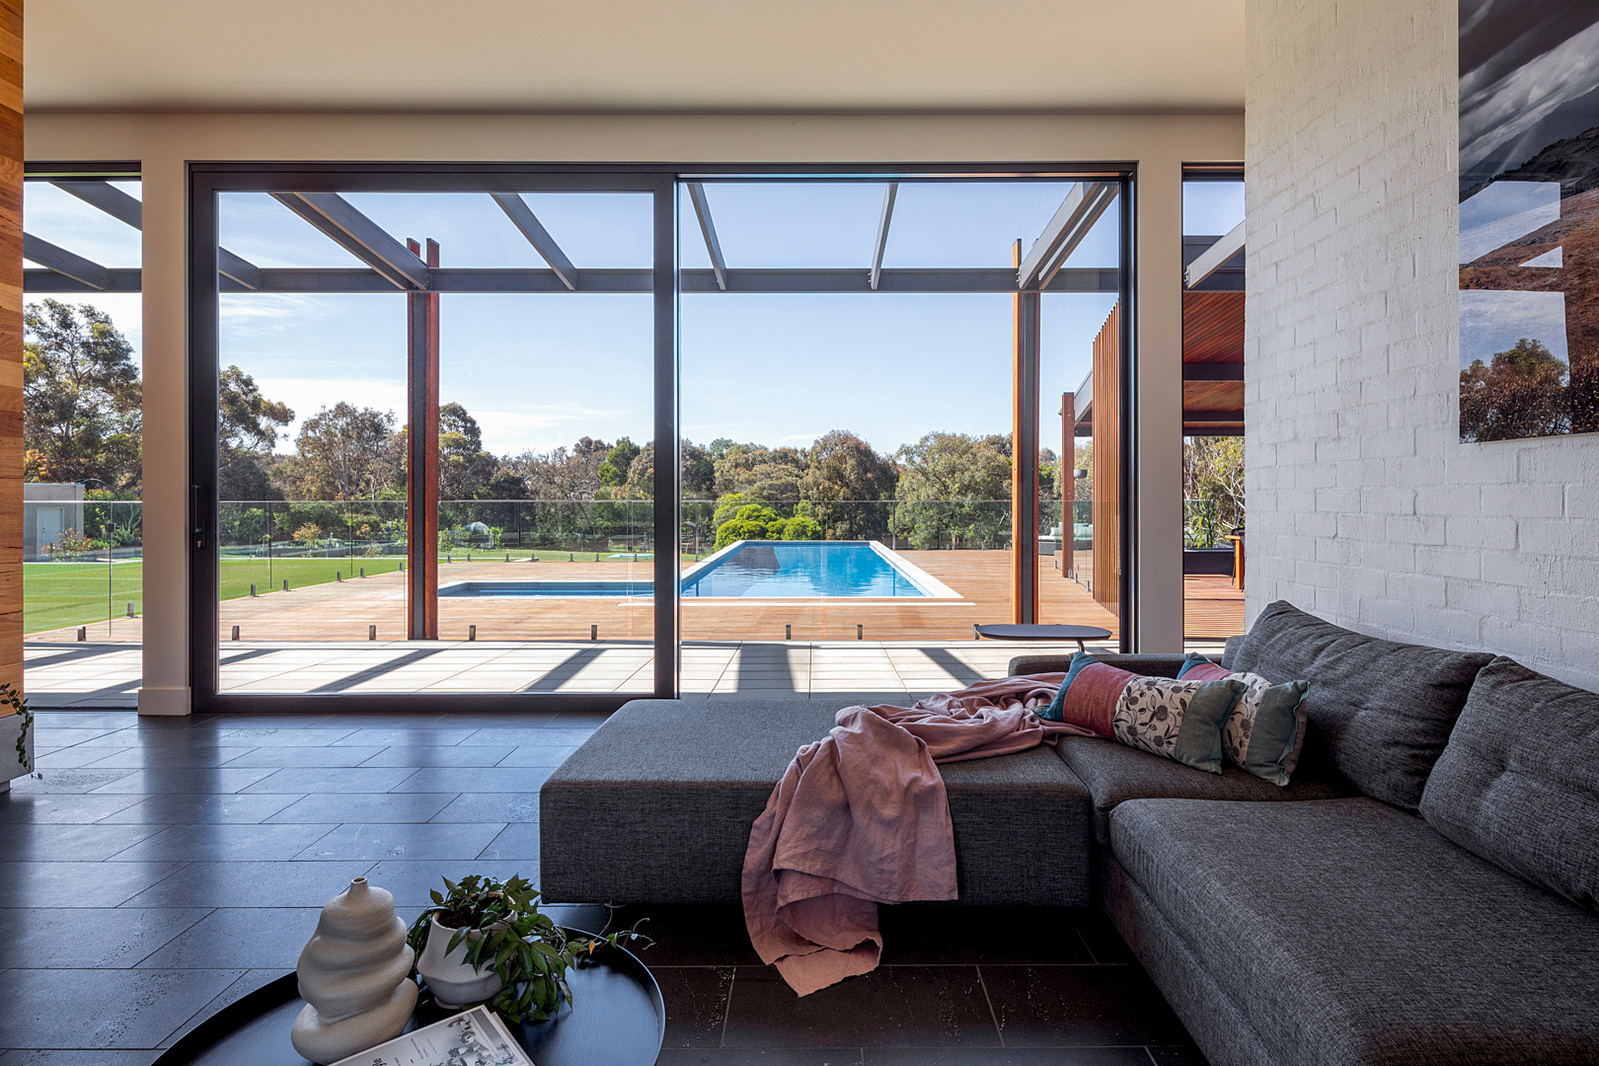 A relaxed north facing living area with outlook onto an inviting swimming pool